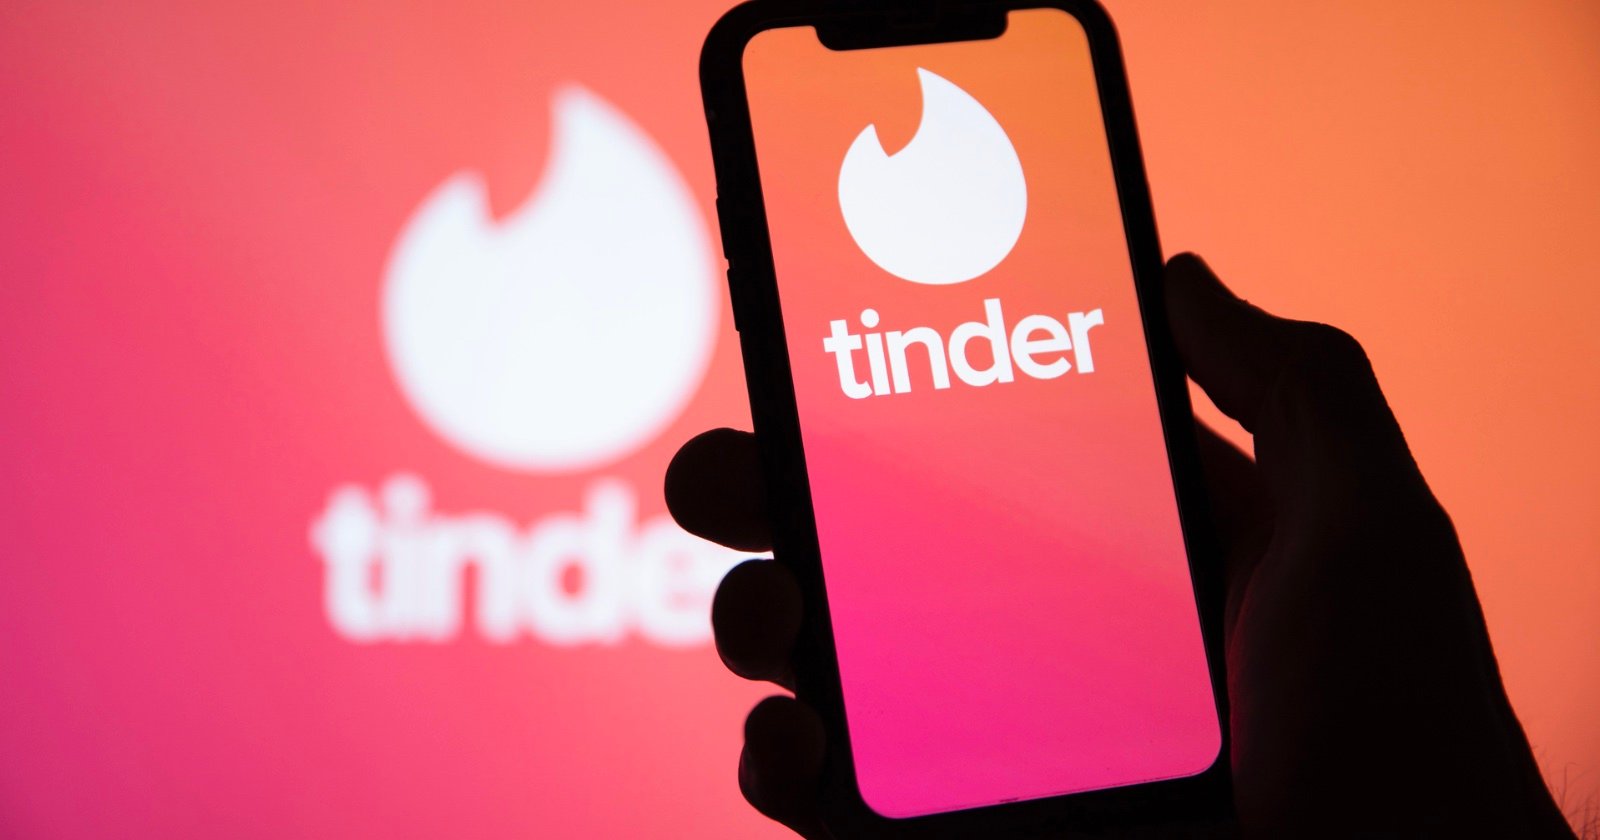 Tinder Will Require Video Selfies Amid Rise of AI Images on Dating Apps